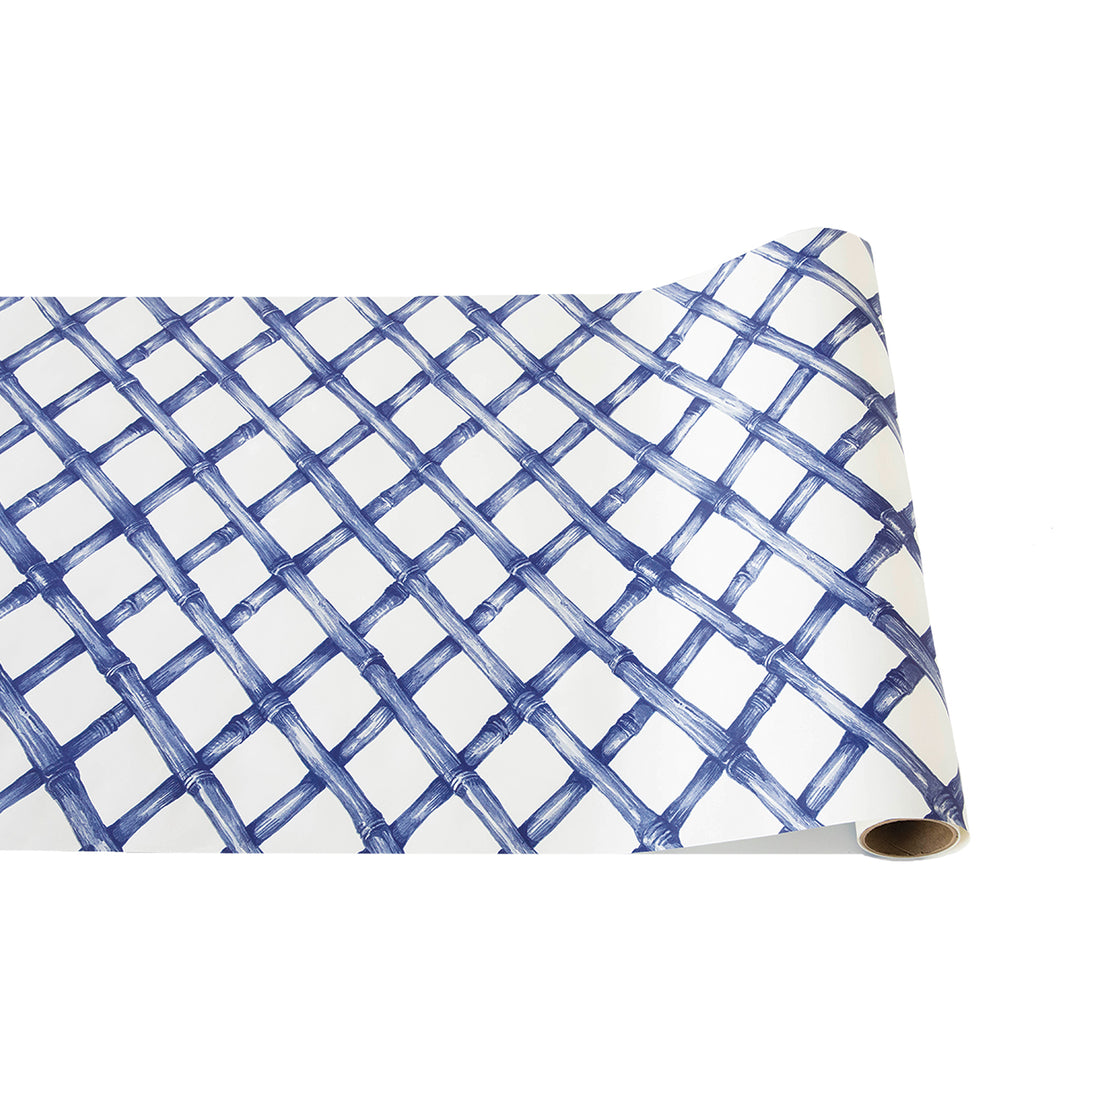 Paper roll featuring a diagonal woven bamboo pattern in monochrome blue on a white background.